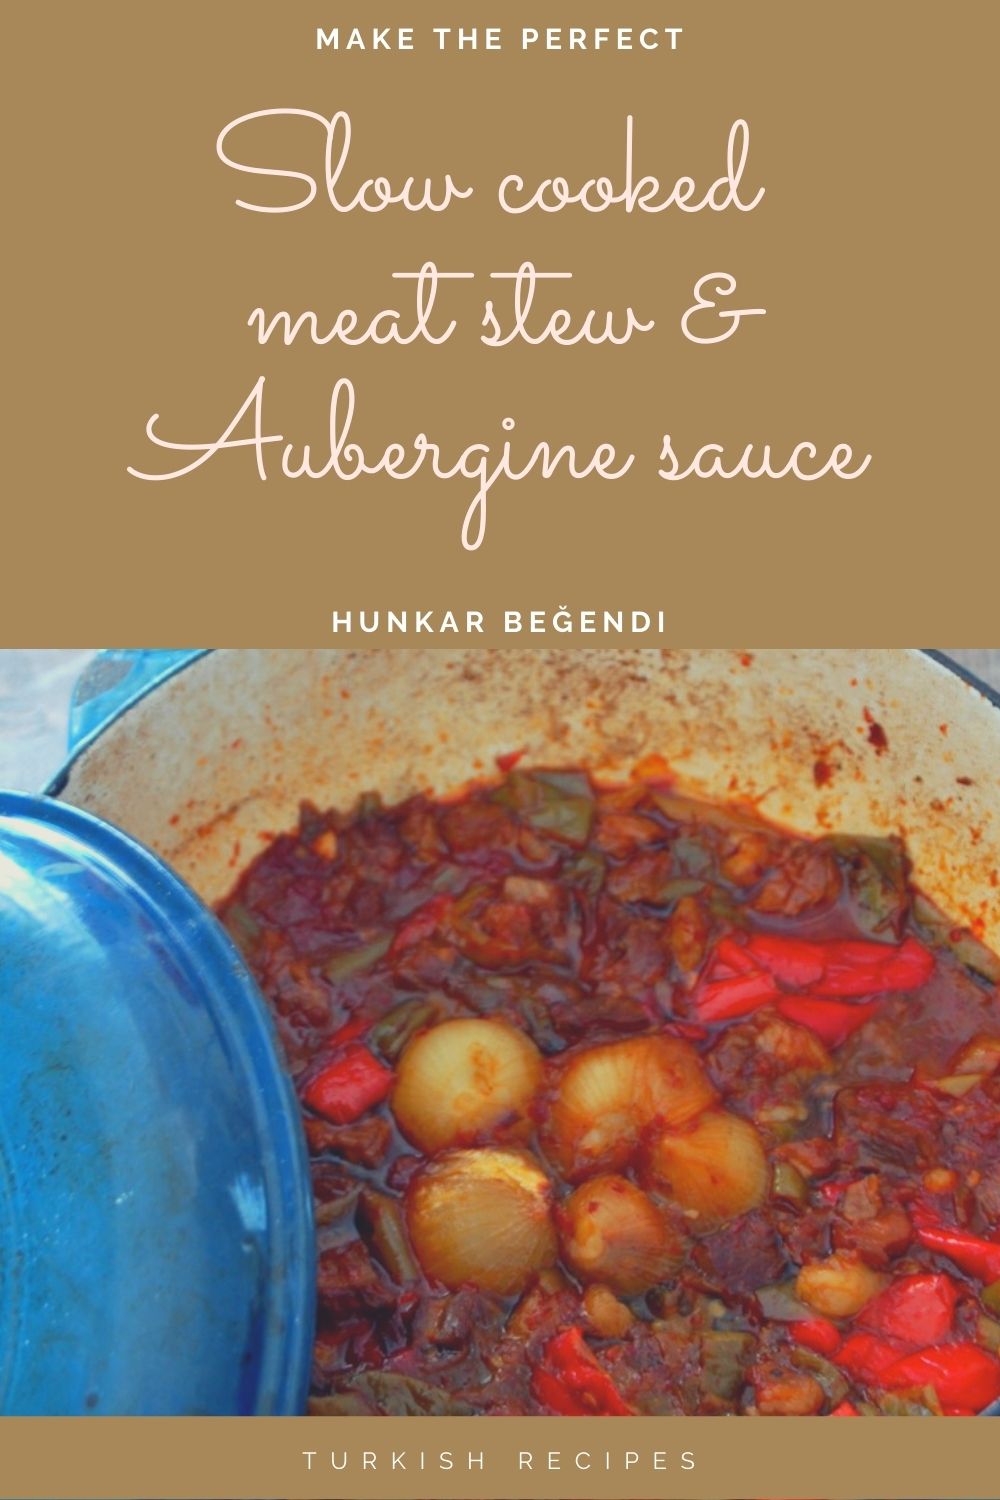 Pinable image showing the Ottoman caserole cooked with text overlay: Make the perfect slow cooked meat stew with aubergine sauce.